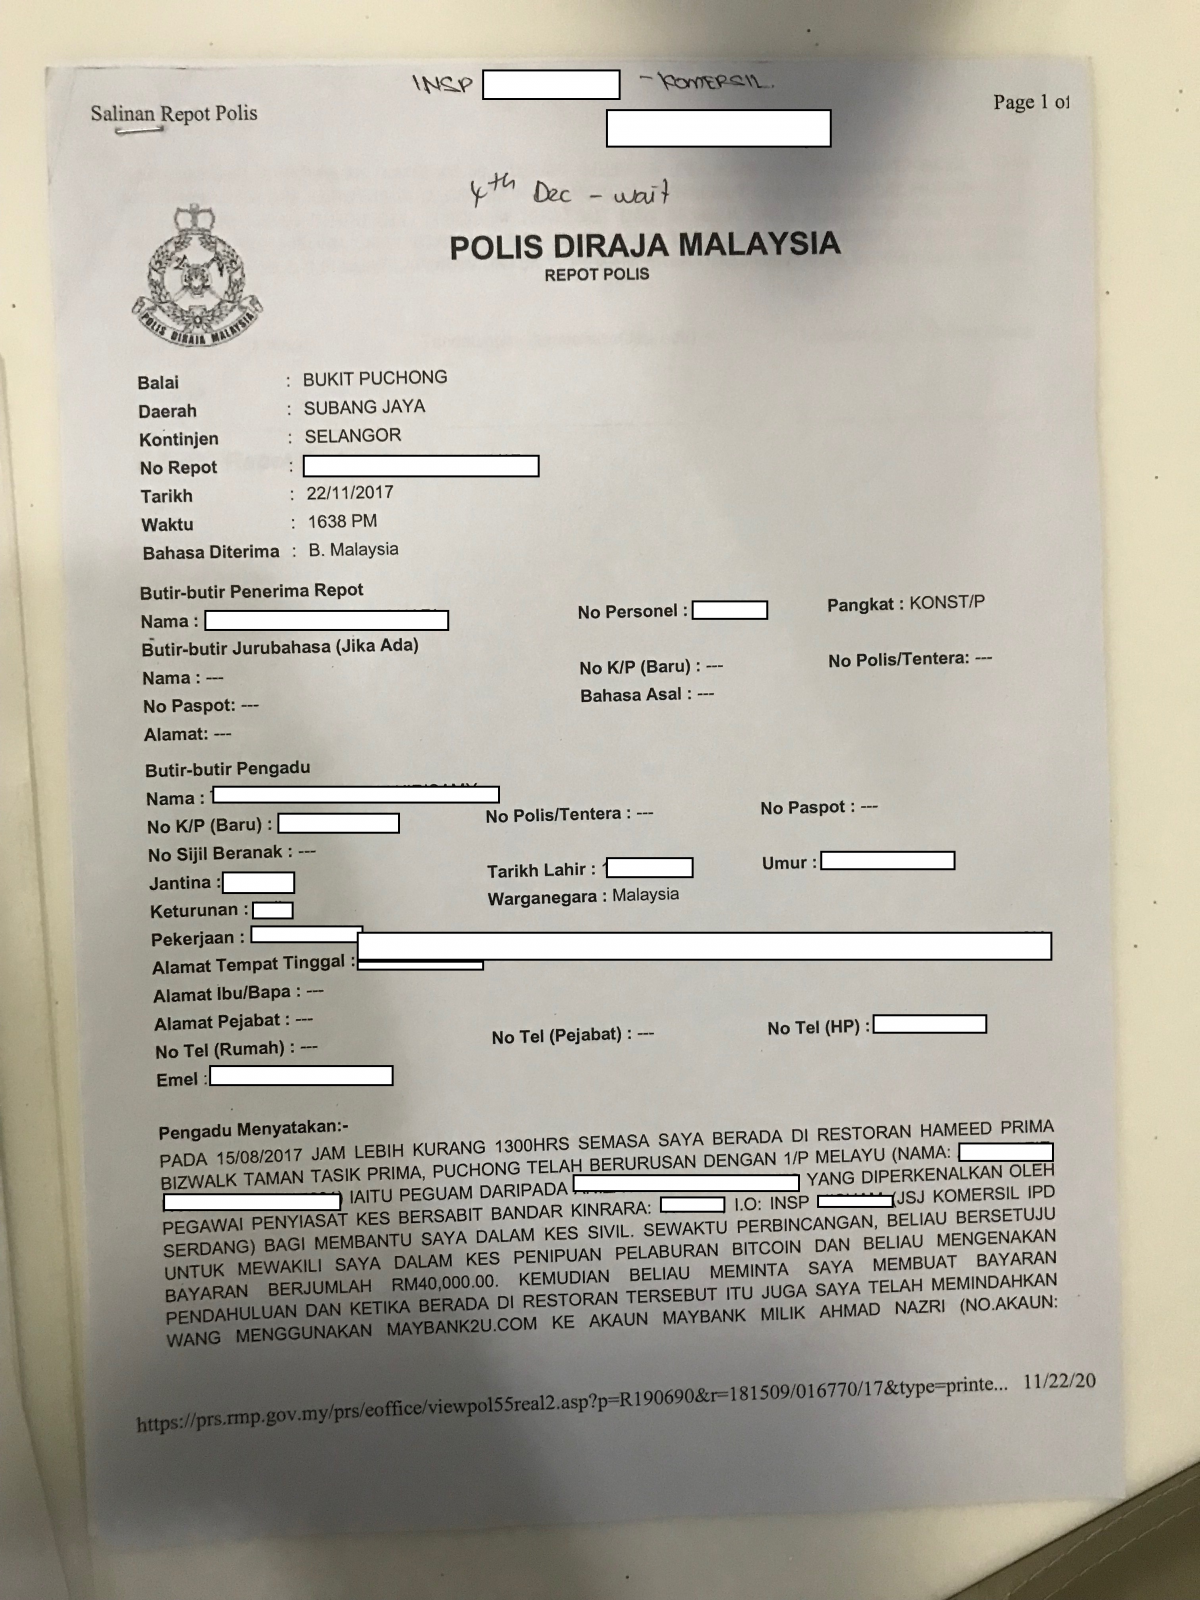 Unlucky Couple Gets Scammed RM13,000 by Lawyer After Losing RM1.3 Mil to Bitcoin Scam - WORLD OF BUZZ